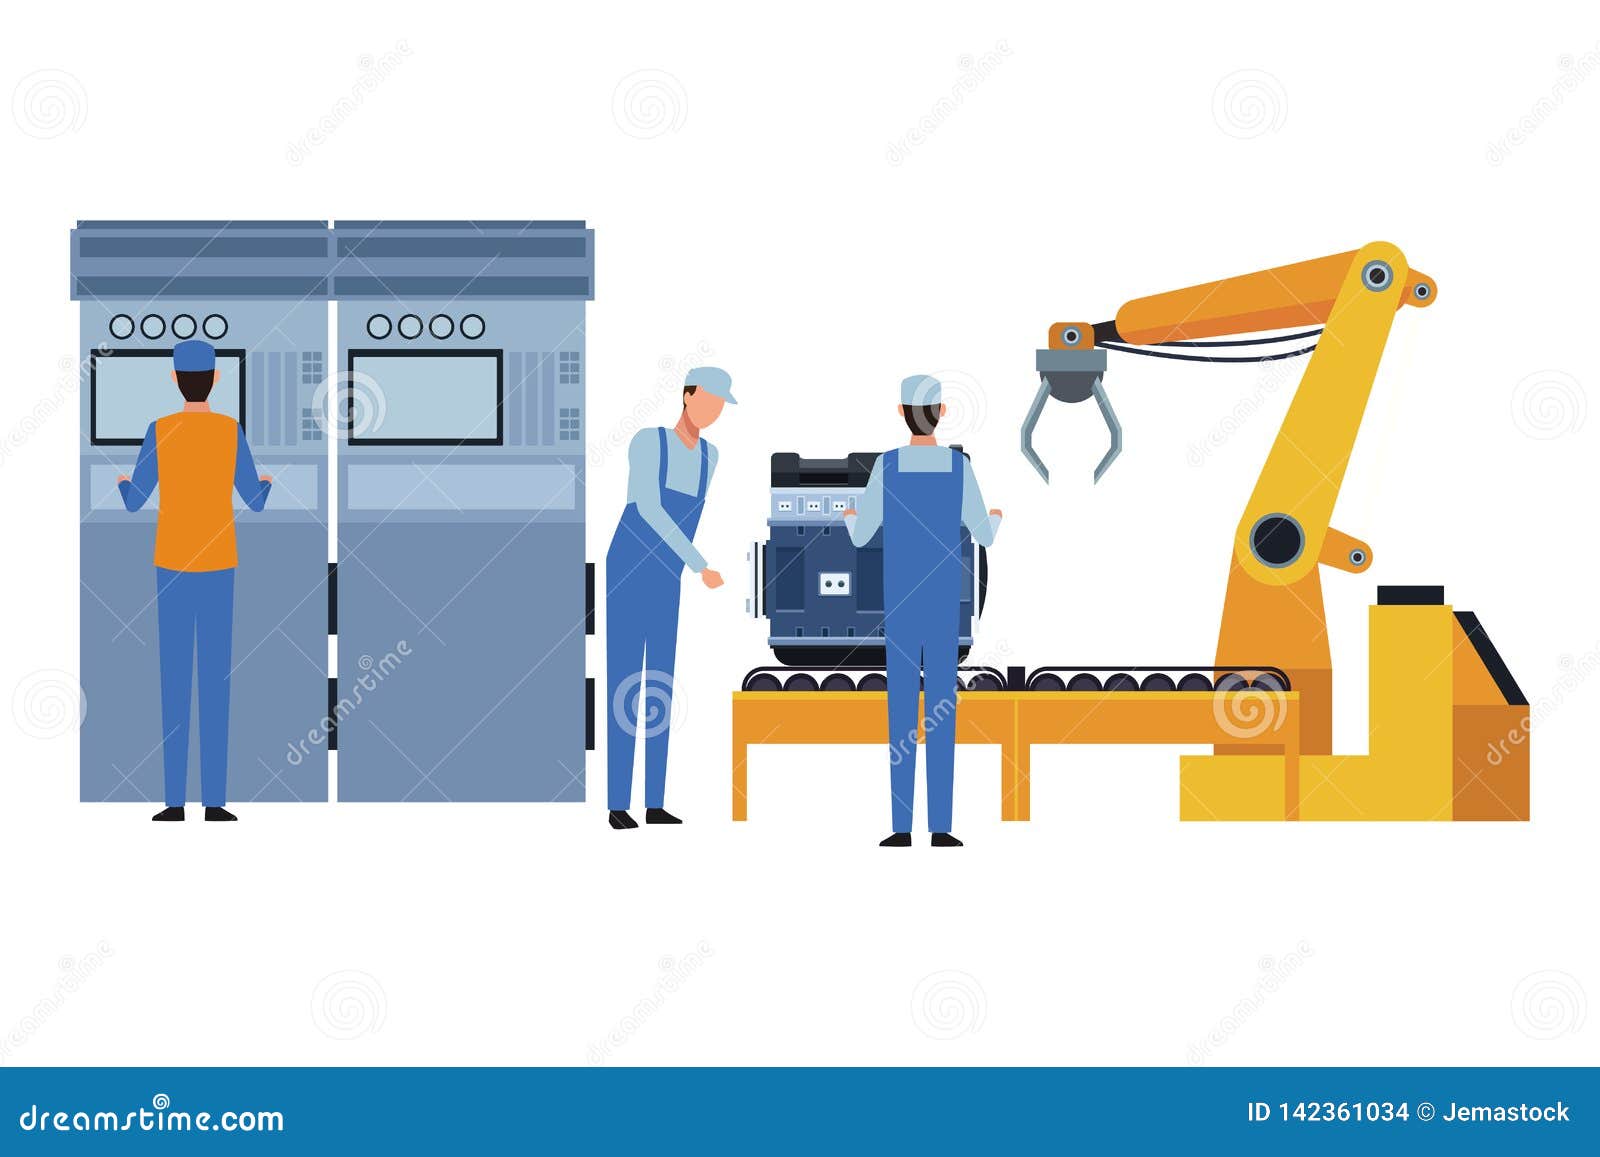 Industry Car Manufacturing Cartoon Stock Vector - Illustration of  connection, machine: 142361034